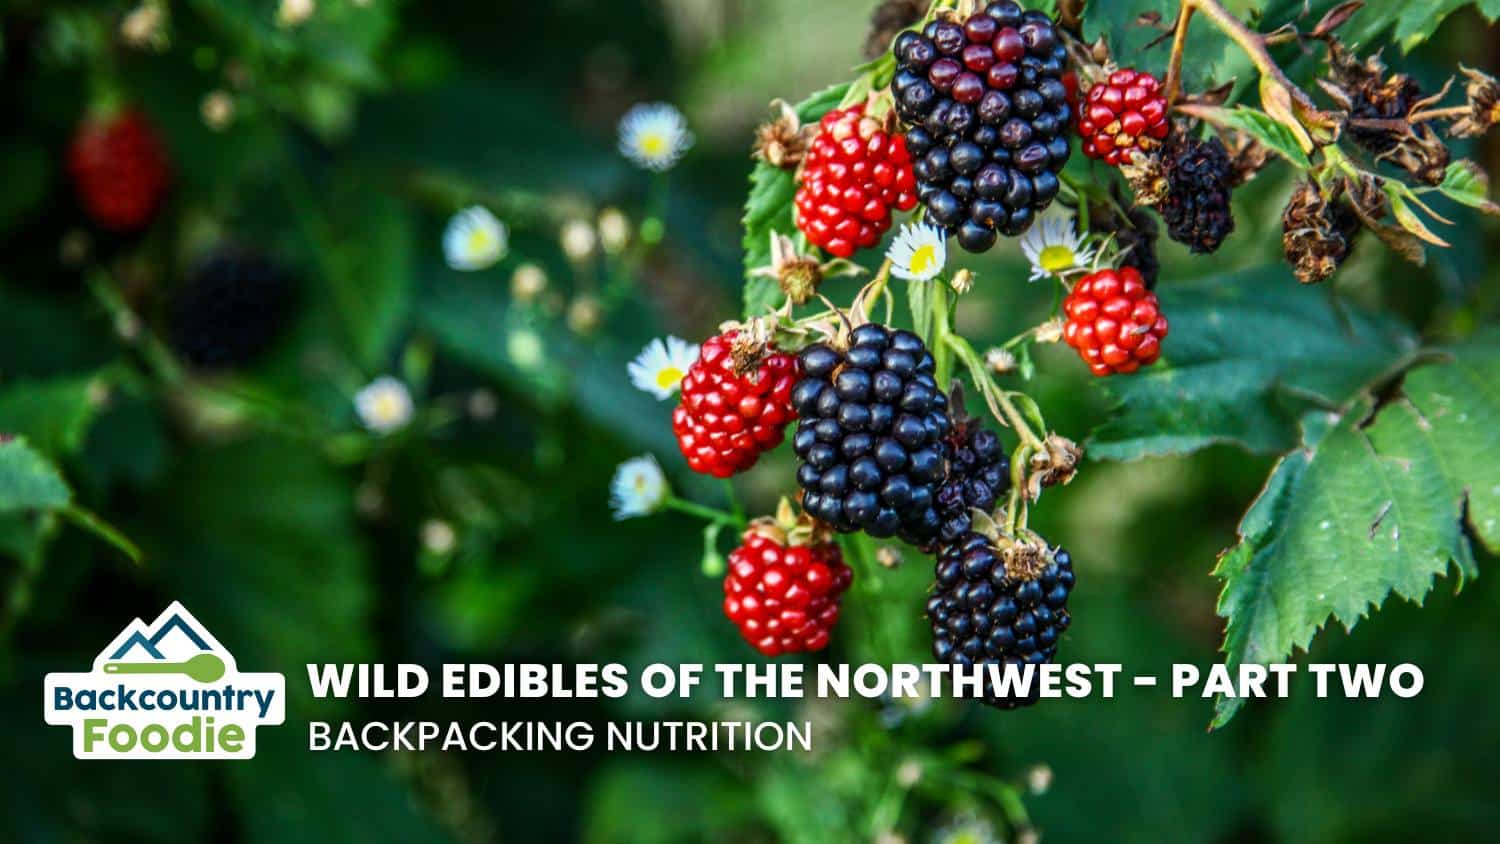 Backcountry Foodie blog Wild Edibles of the Northwest Part Two thumbnail